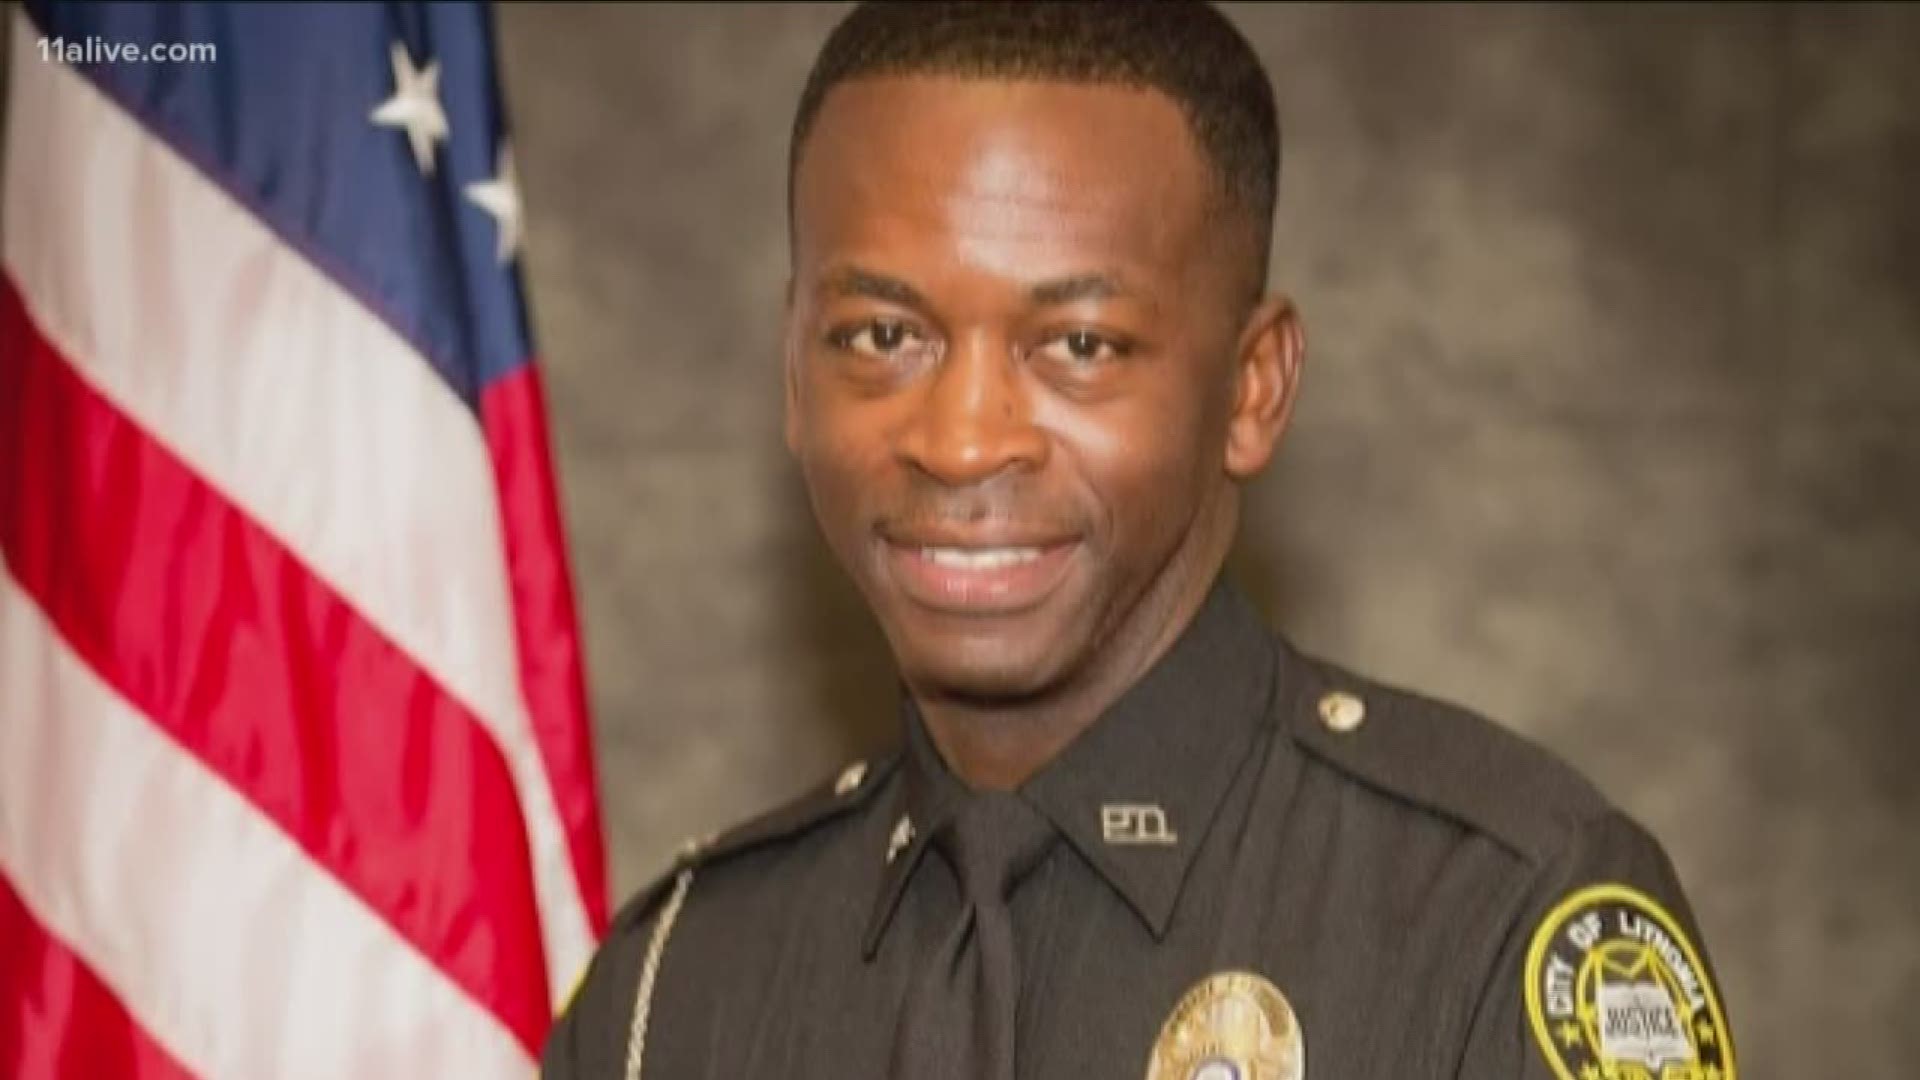 Lithonia Police Officer David Wilborn is expected to make a first court appearance Saturday afternoon in DeKalb County on multiple charges including rape.